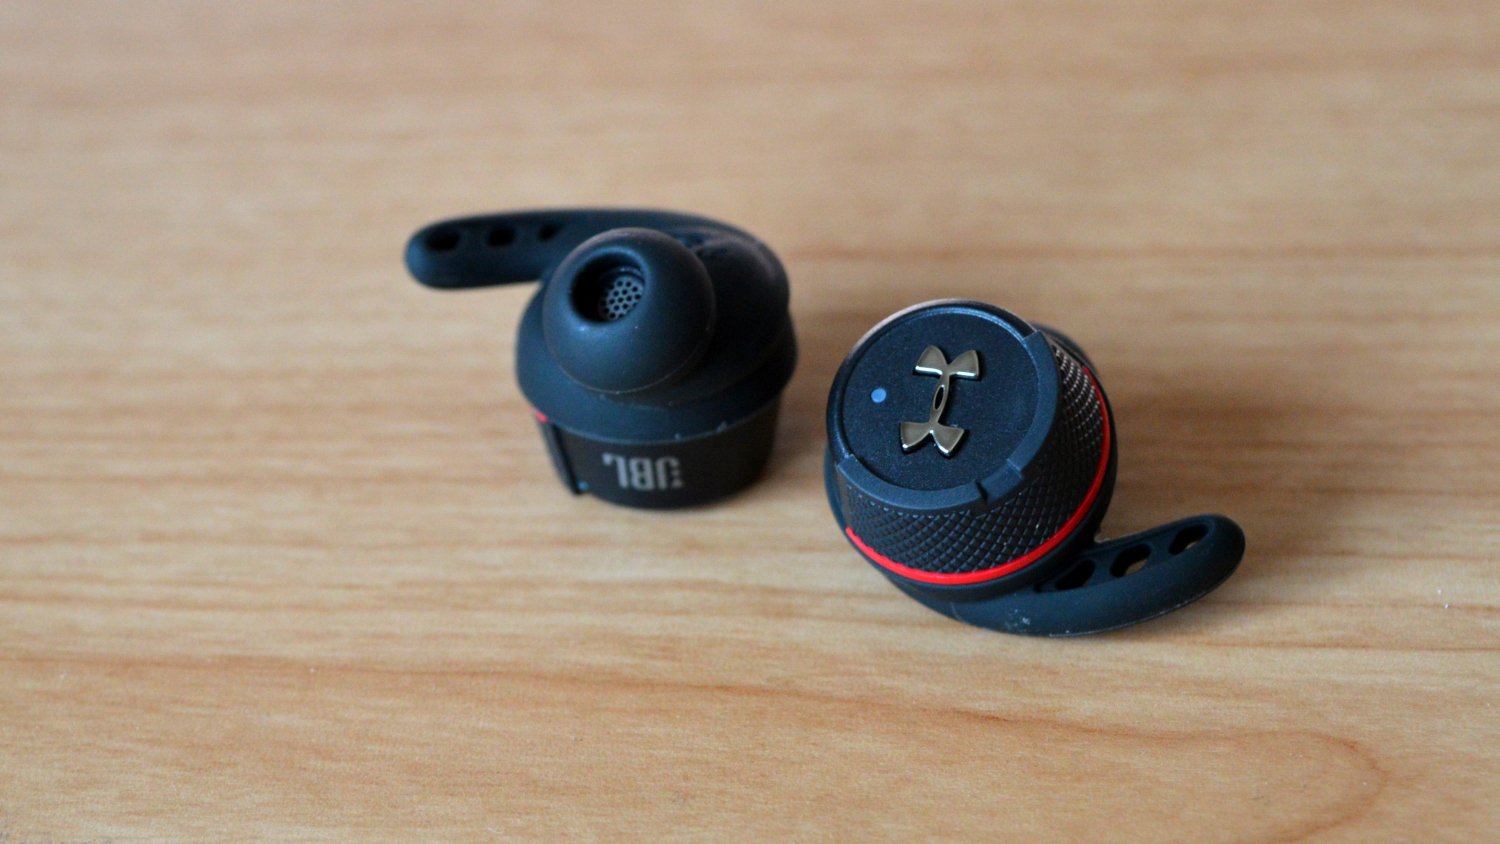 courage element In fact JBL Under Armour True Wireless Flash Review - Headphone Review